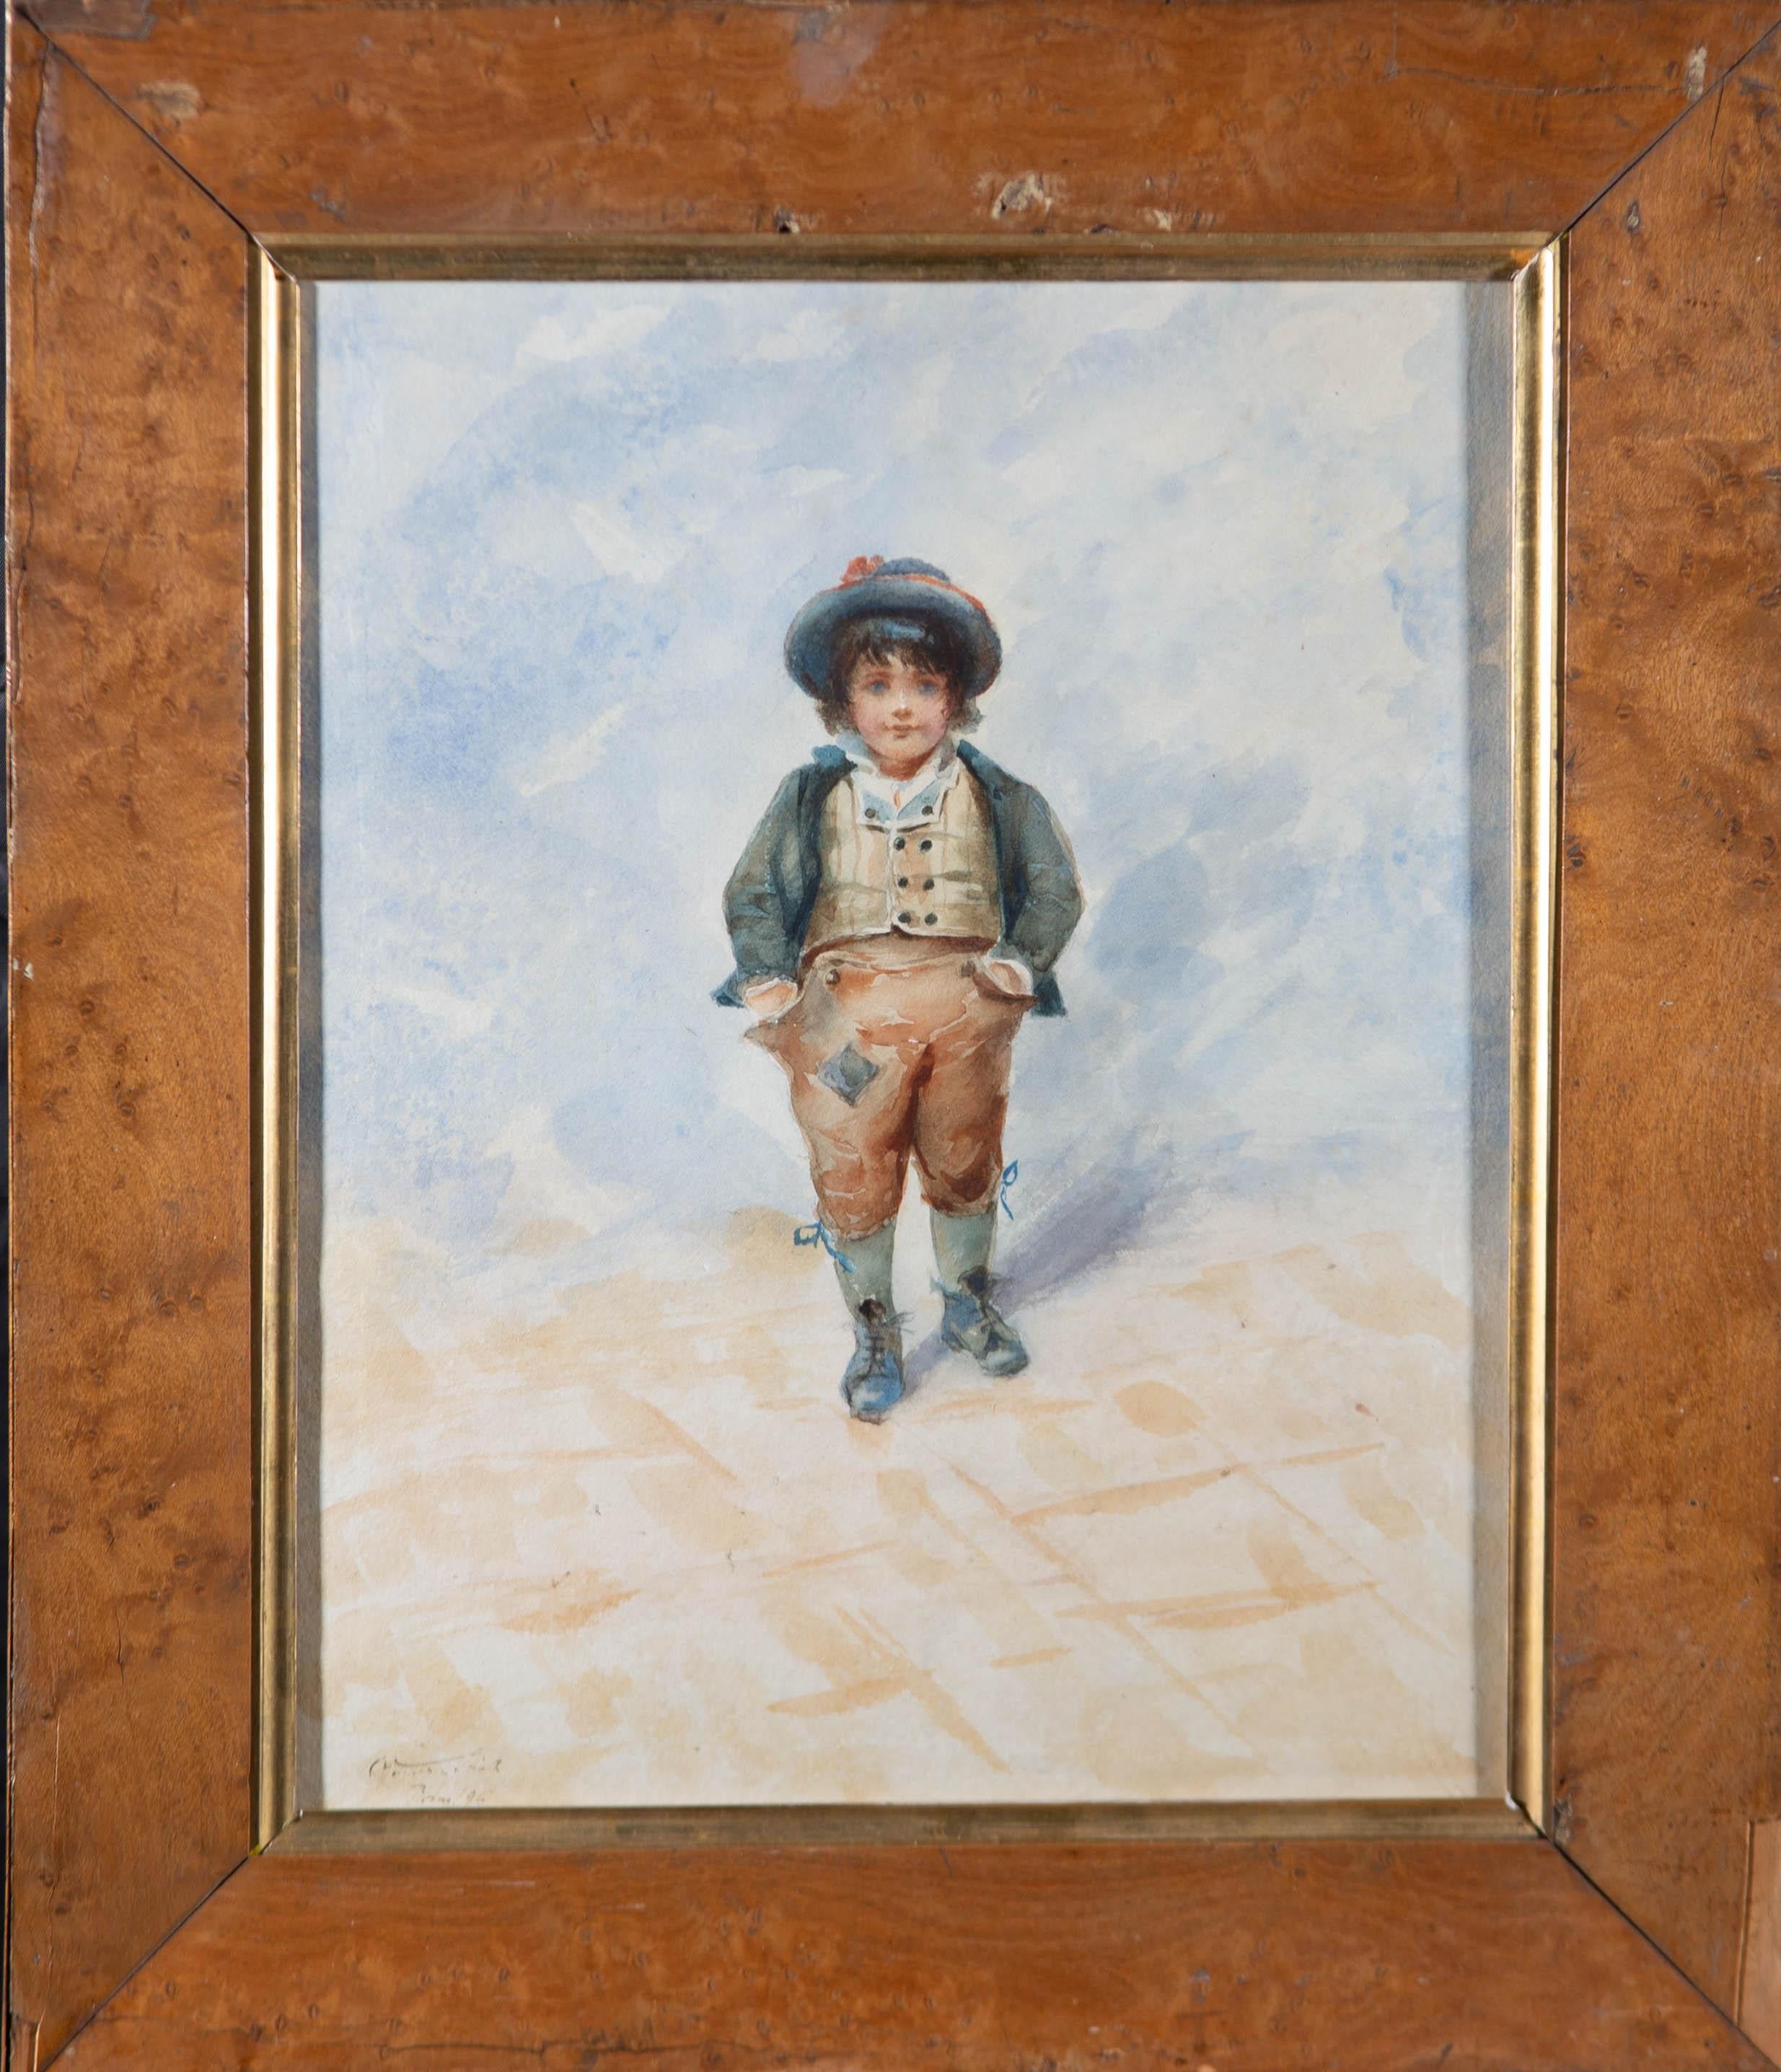 A characterful portrait in watercolour of a young boy wearing a blue hat and brown britches.

The artist has signed faintly and dated to the lower left corner. The painting has been presented in a fine, birds eye maple frame with a gilt inner window